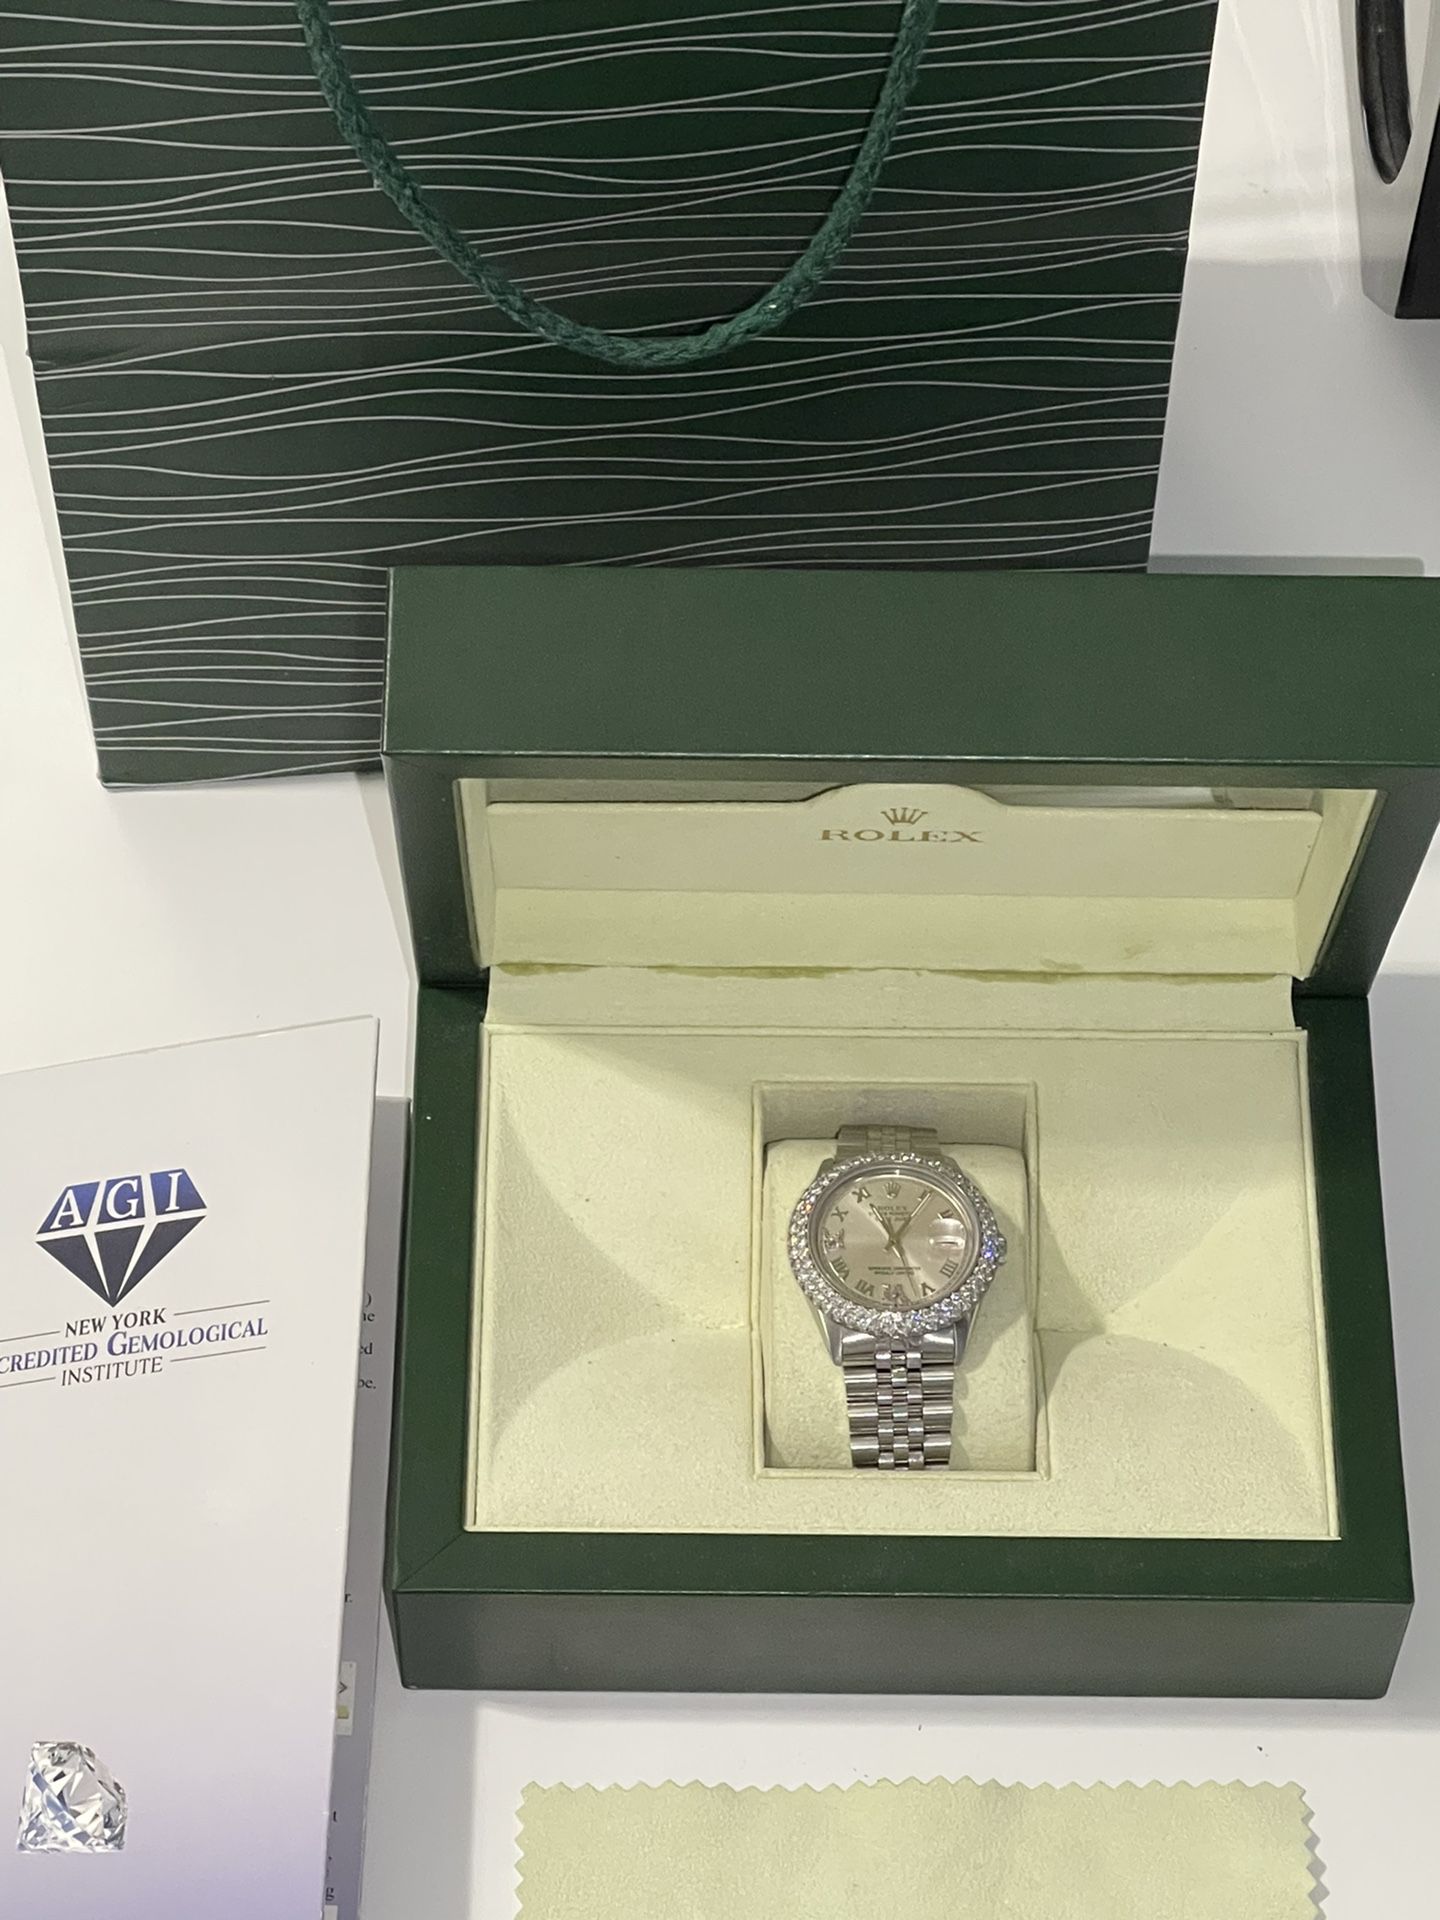 ROLEX 36MM DATEJUST STEEL ROMAN DIAL 5.25 CT BEZEL VS2 APPRAISAL INCLUDED MINT CONDITION ORIGINAL WON'T LAST! for in Brooklyn, NY - OfferUp